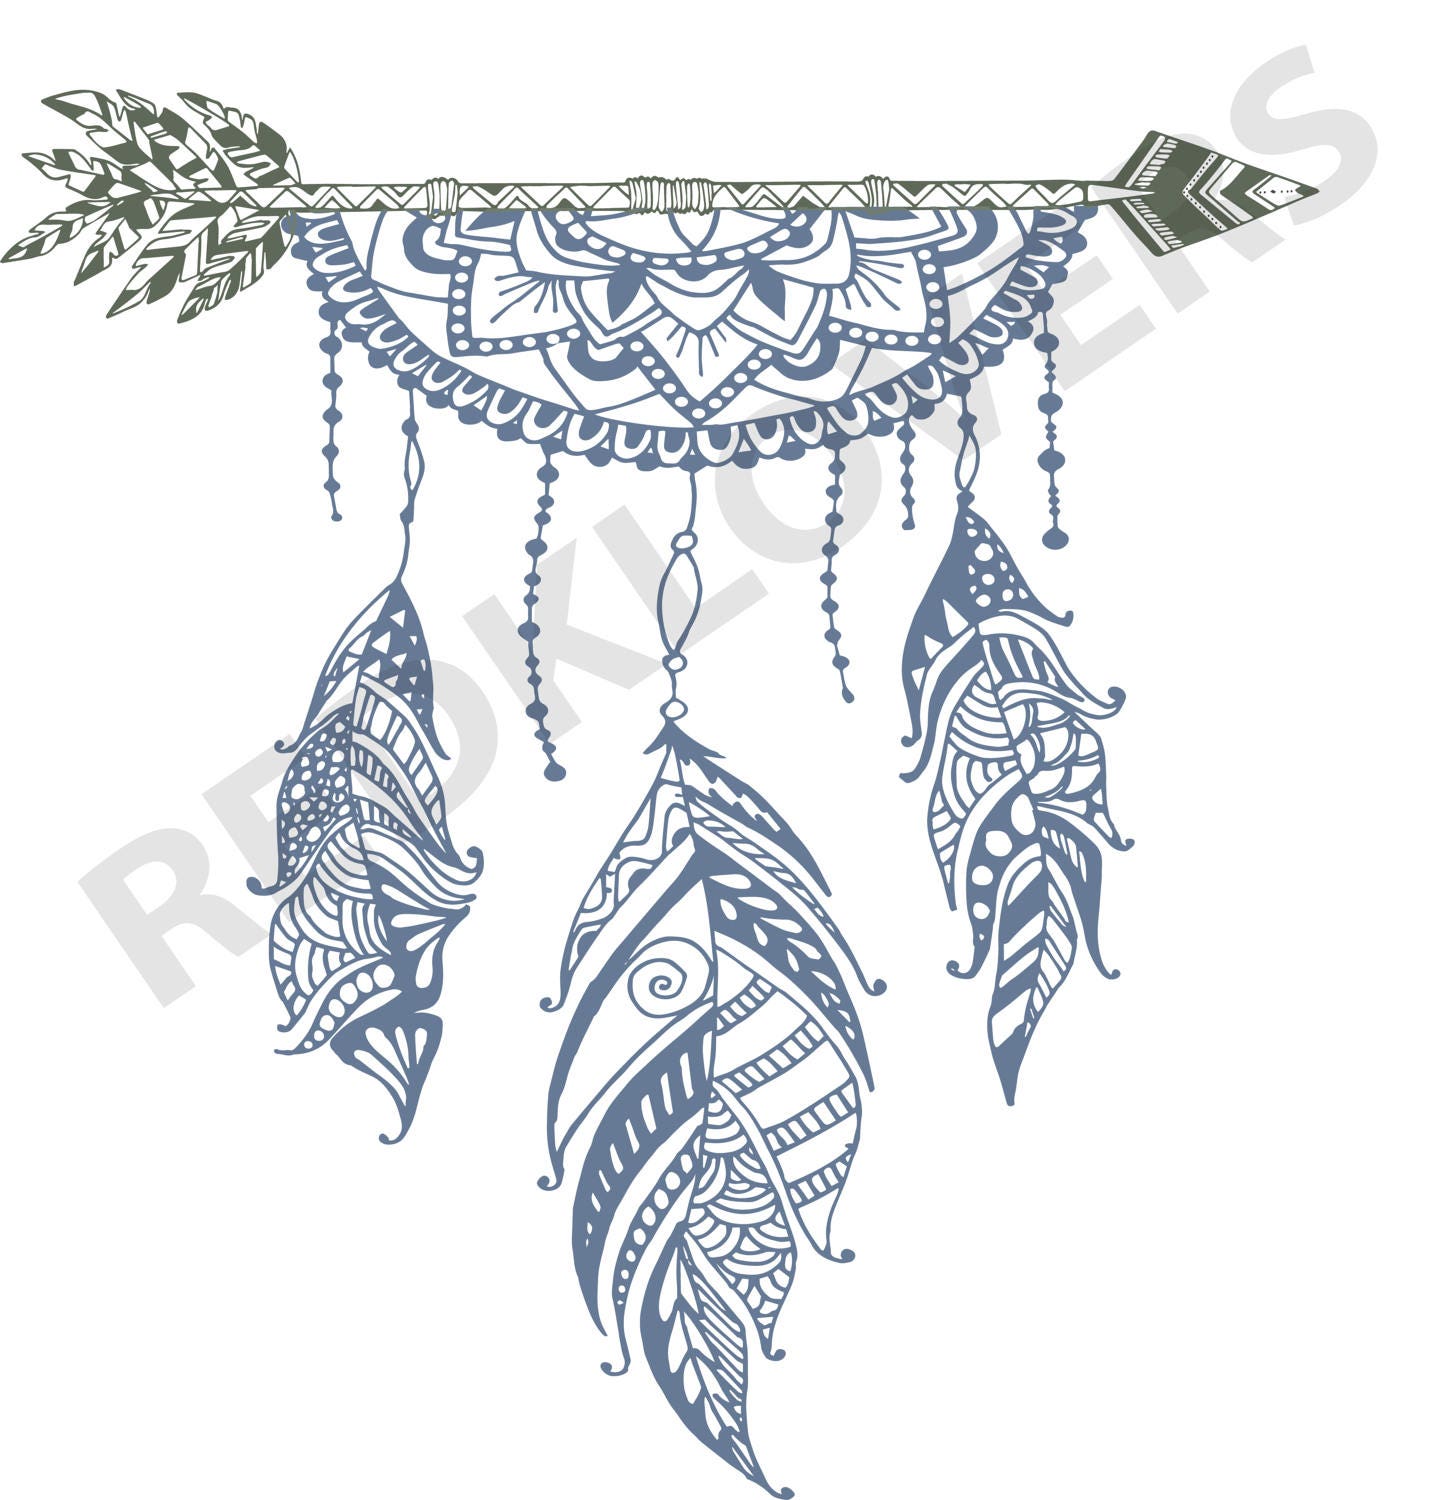 Download SVG DXF silhouette feather arrows dreamcatcher boho native